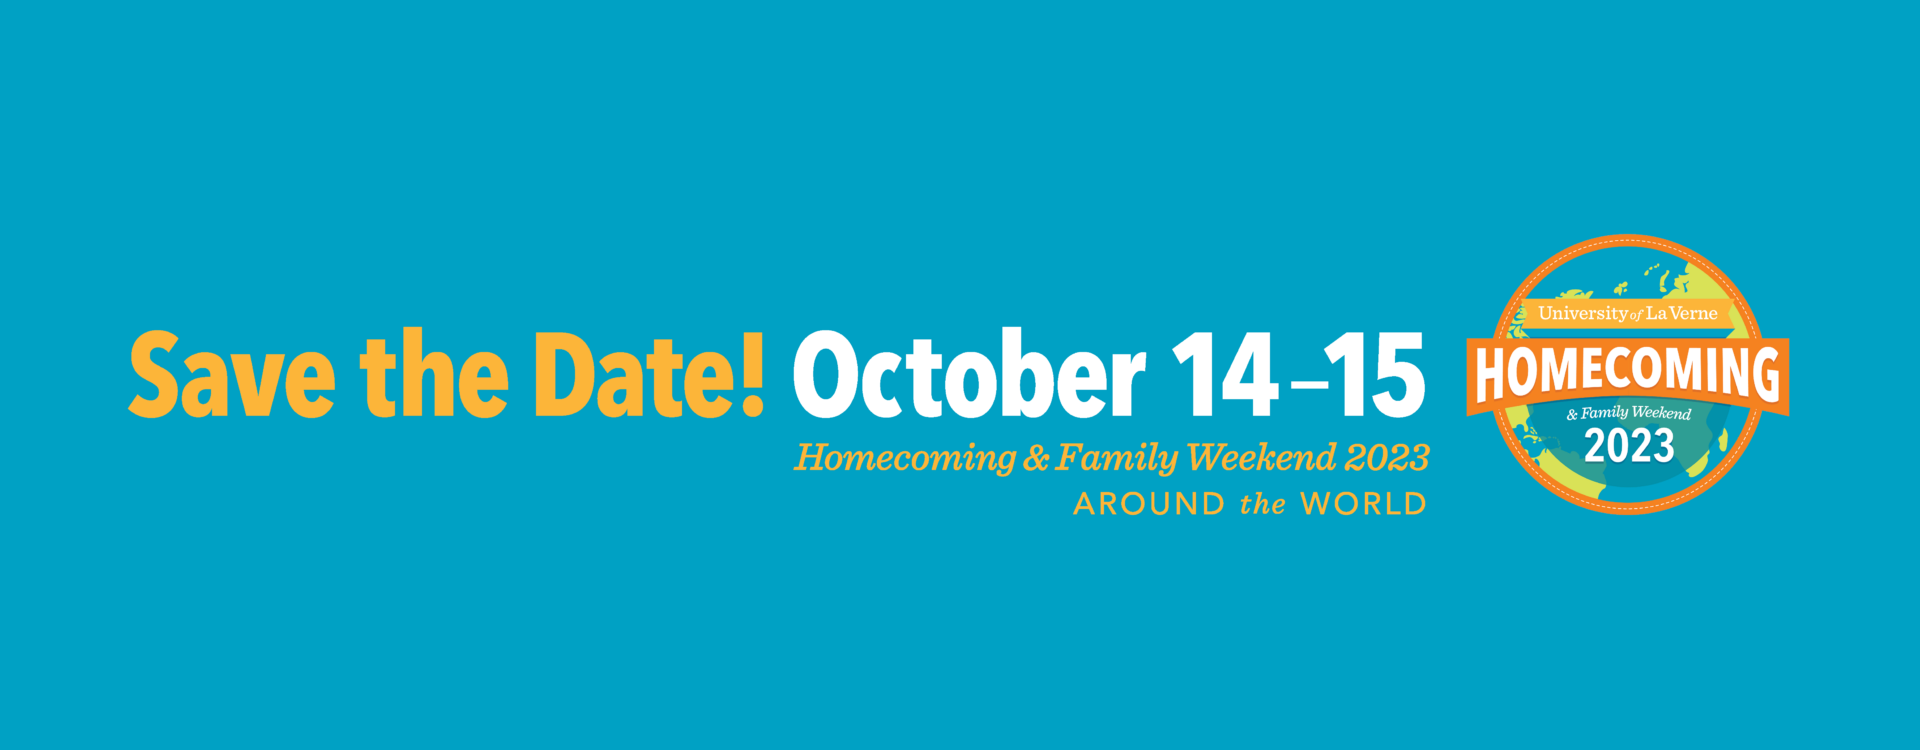 Save the Date: Homecoming & Family Weekend | October 14-15, 2023